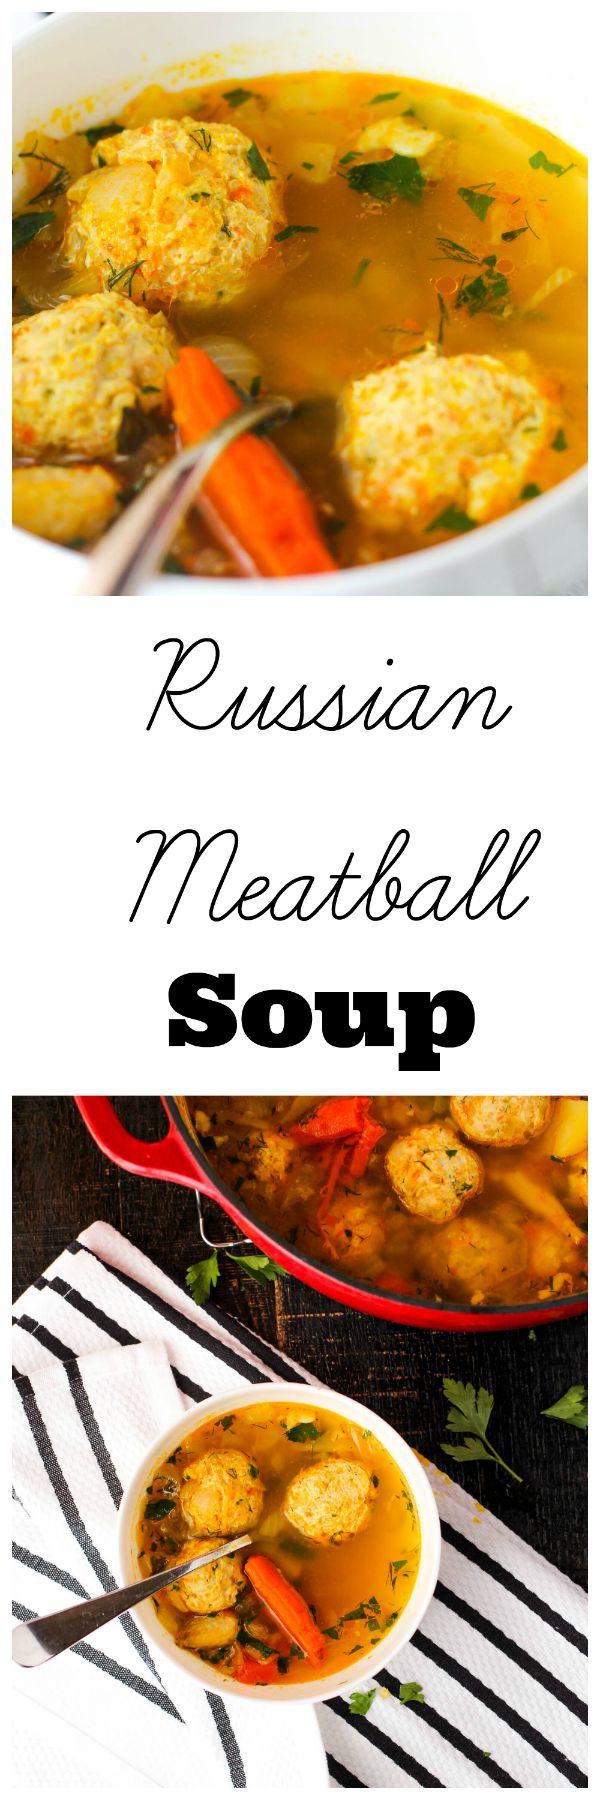 My Russian Meatball Soup is loaded with beautiful and tender chicken meatballs floating in a warm and comforting broth. It's an ultimate sniffle soother!